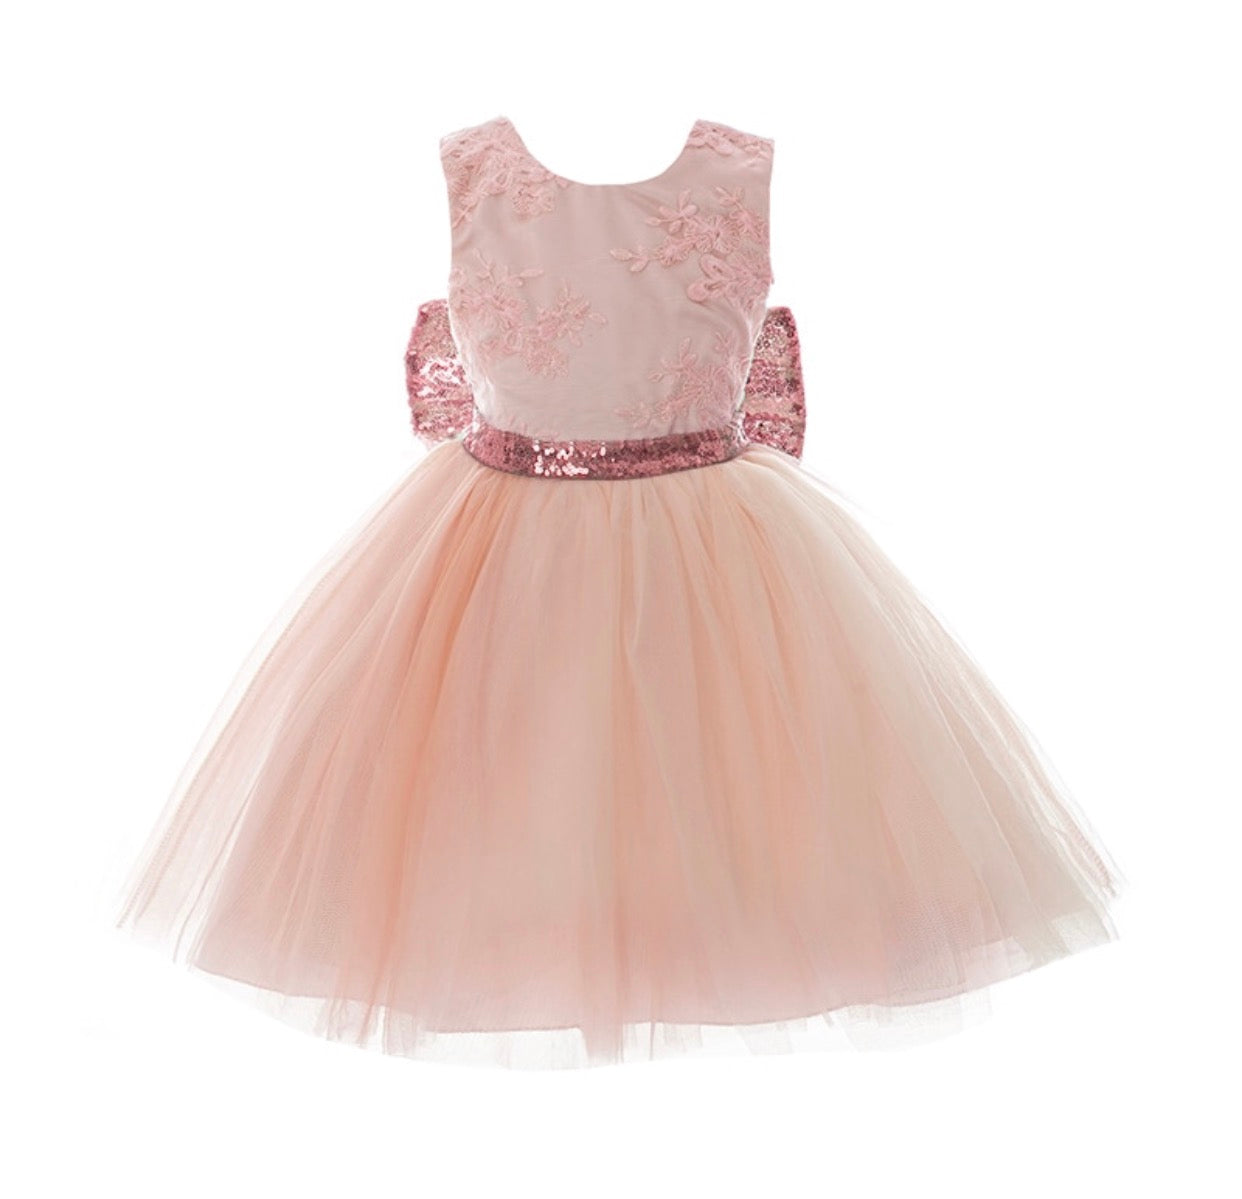 Toddler Fancy Sequins Belt And Bow Party Dress